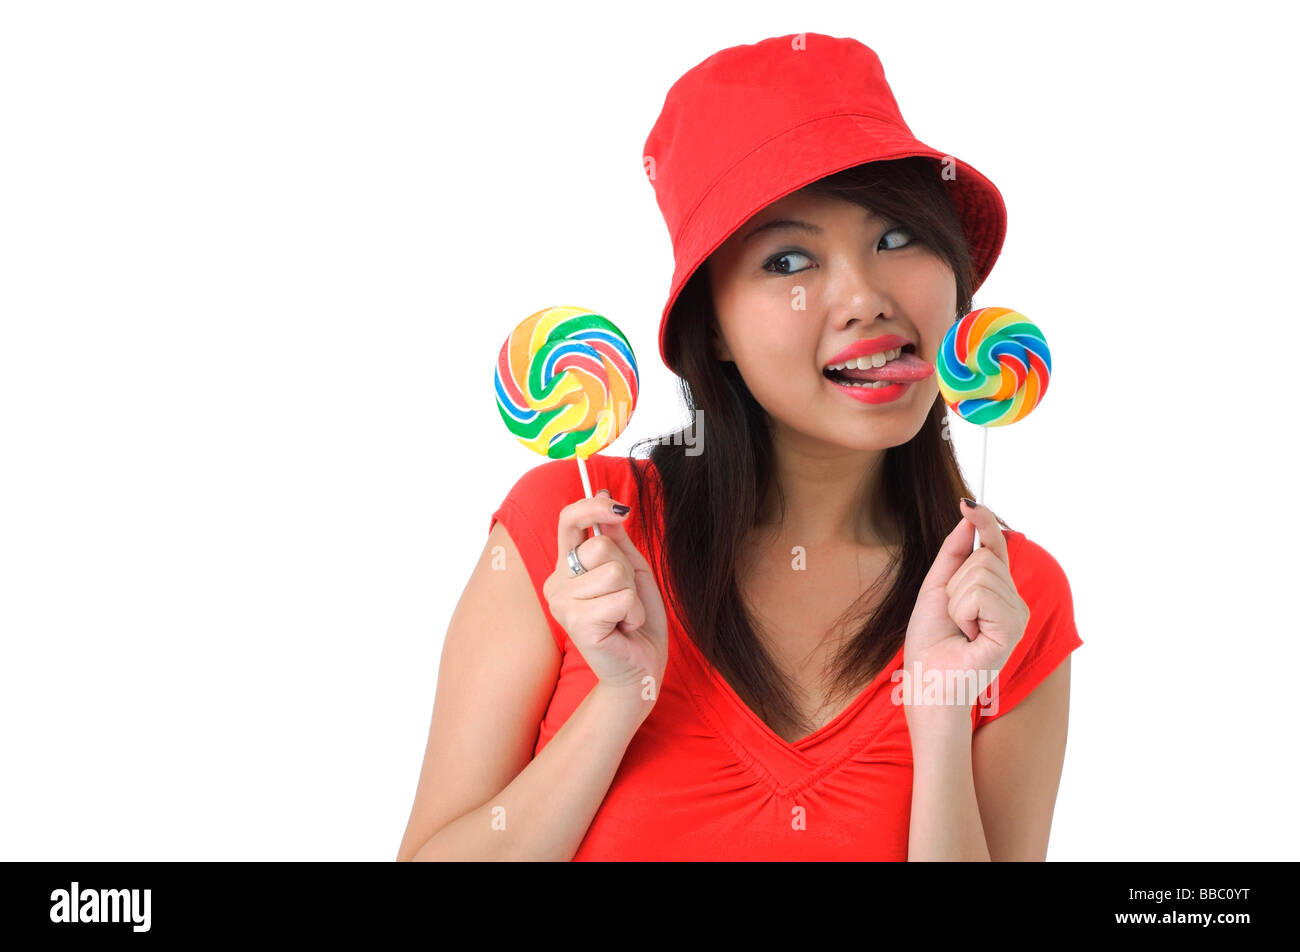 Young woman licking on lollipop Stock Photo